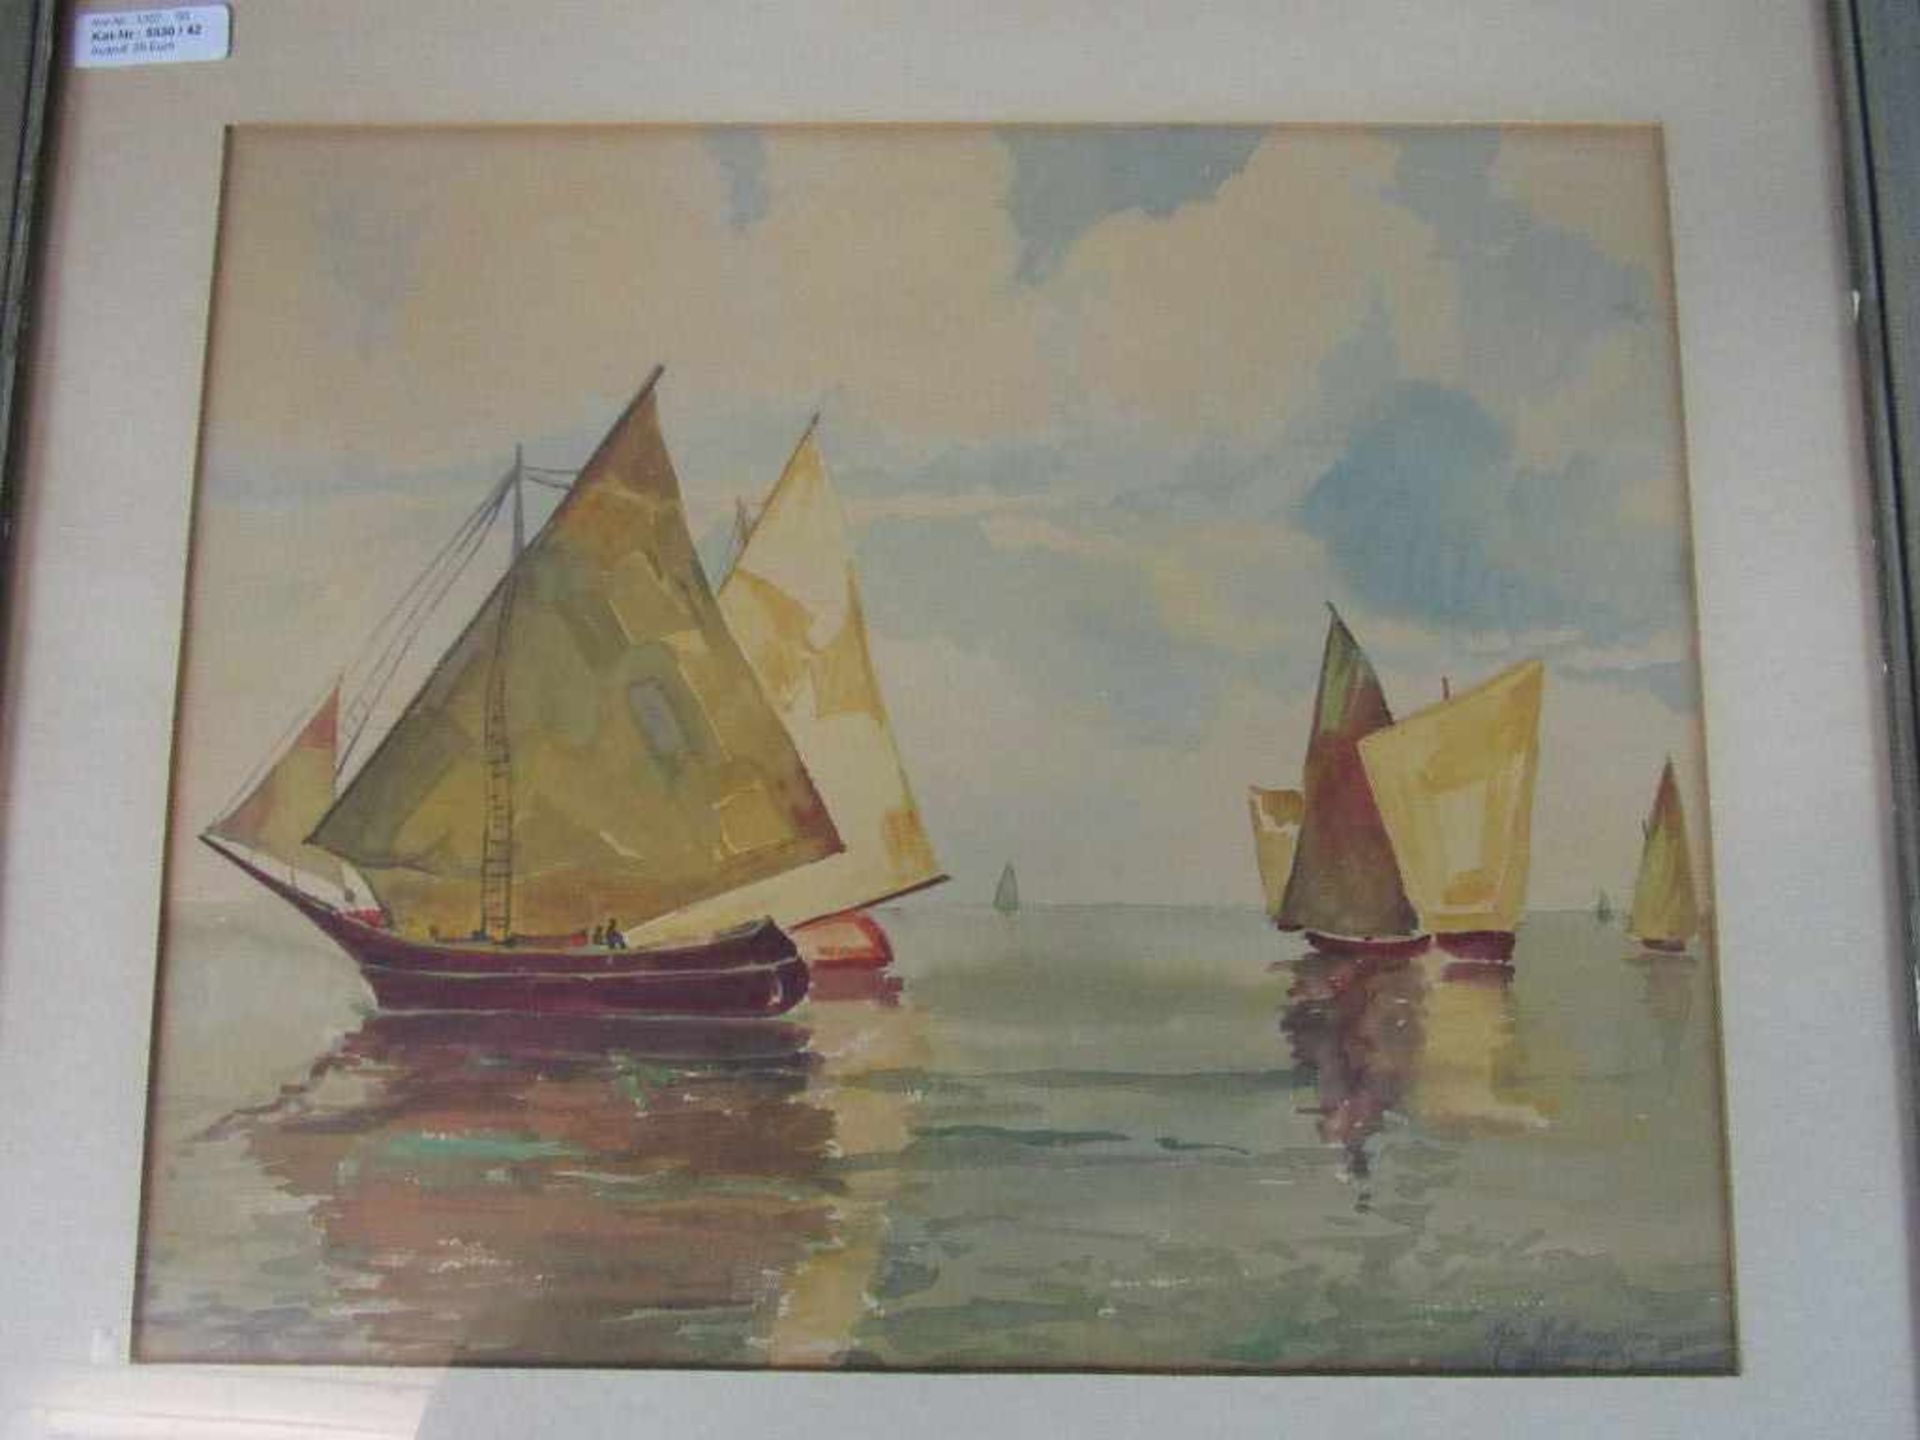 Aquarell Hoffmann Theo Segelboote bei ruhiger See Maß:61x71cm- - -20.00 % buyer's premium on the